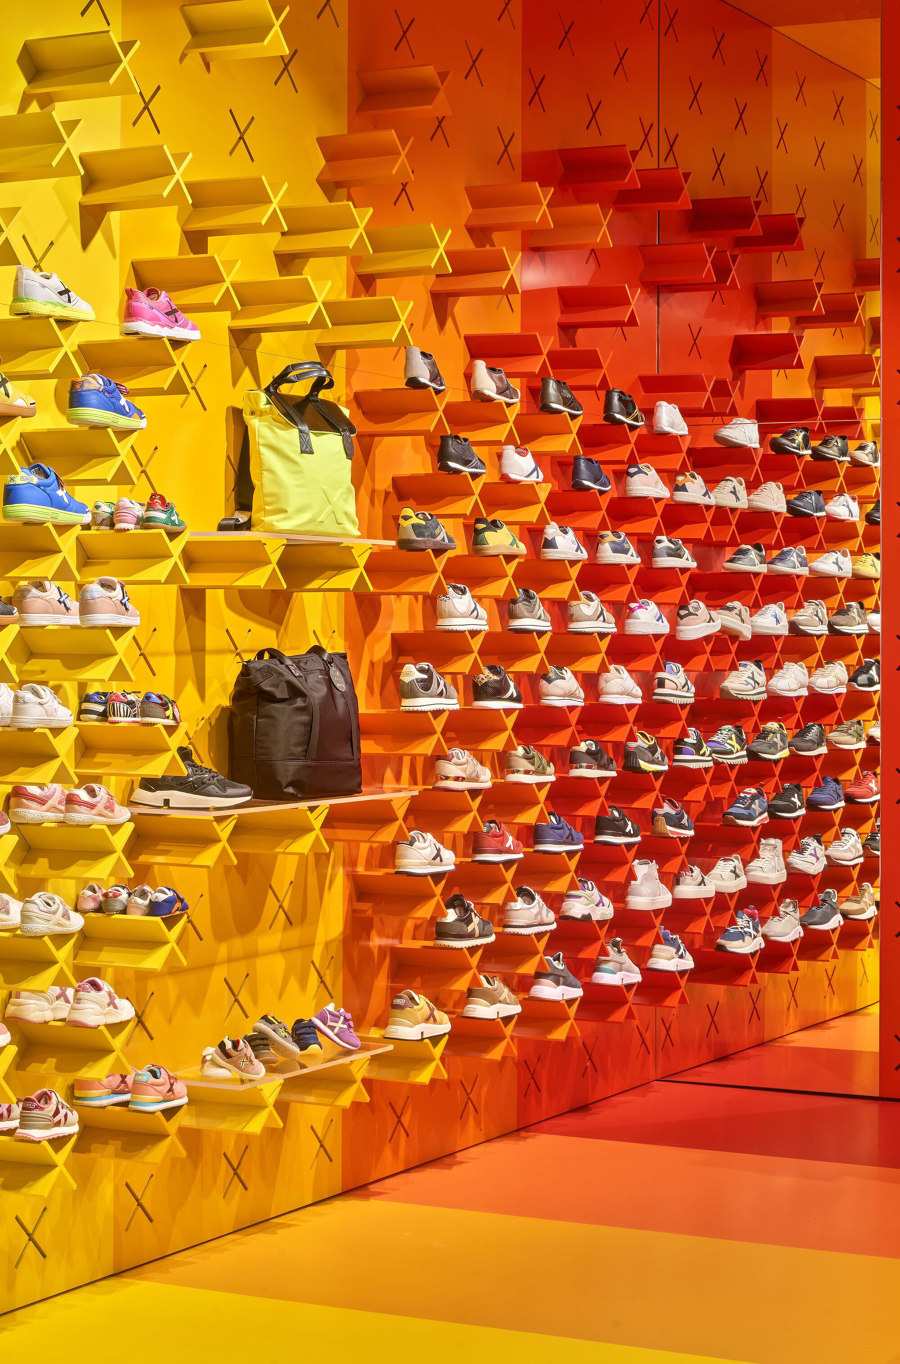 Tread lightly: shoe stores with brand-focused lighting concepts | Nouveautés